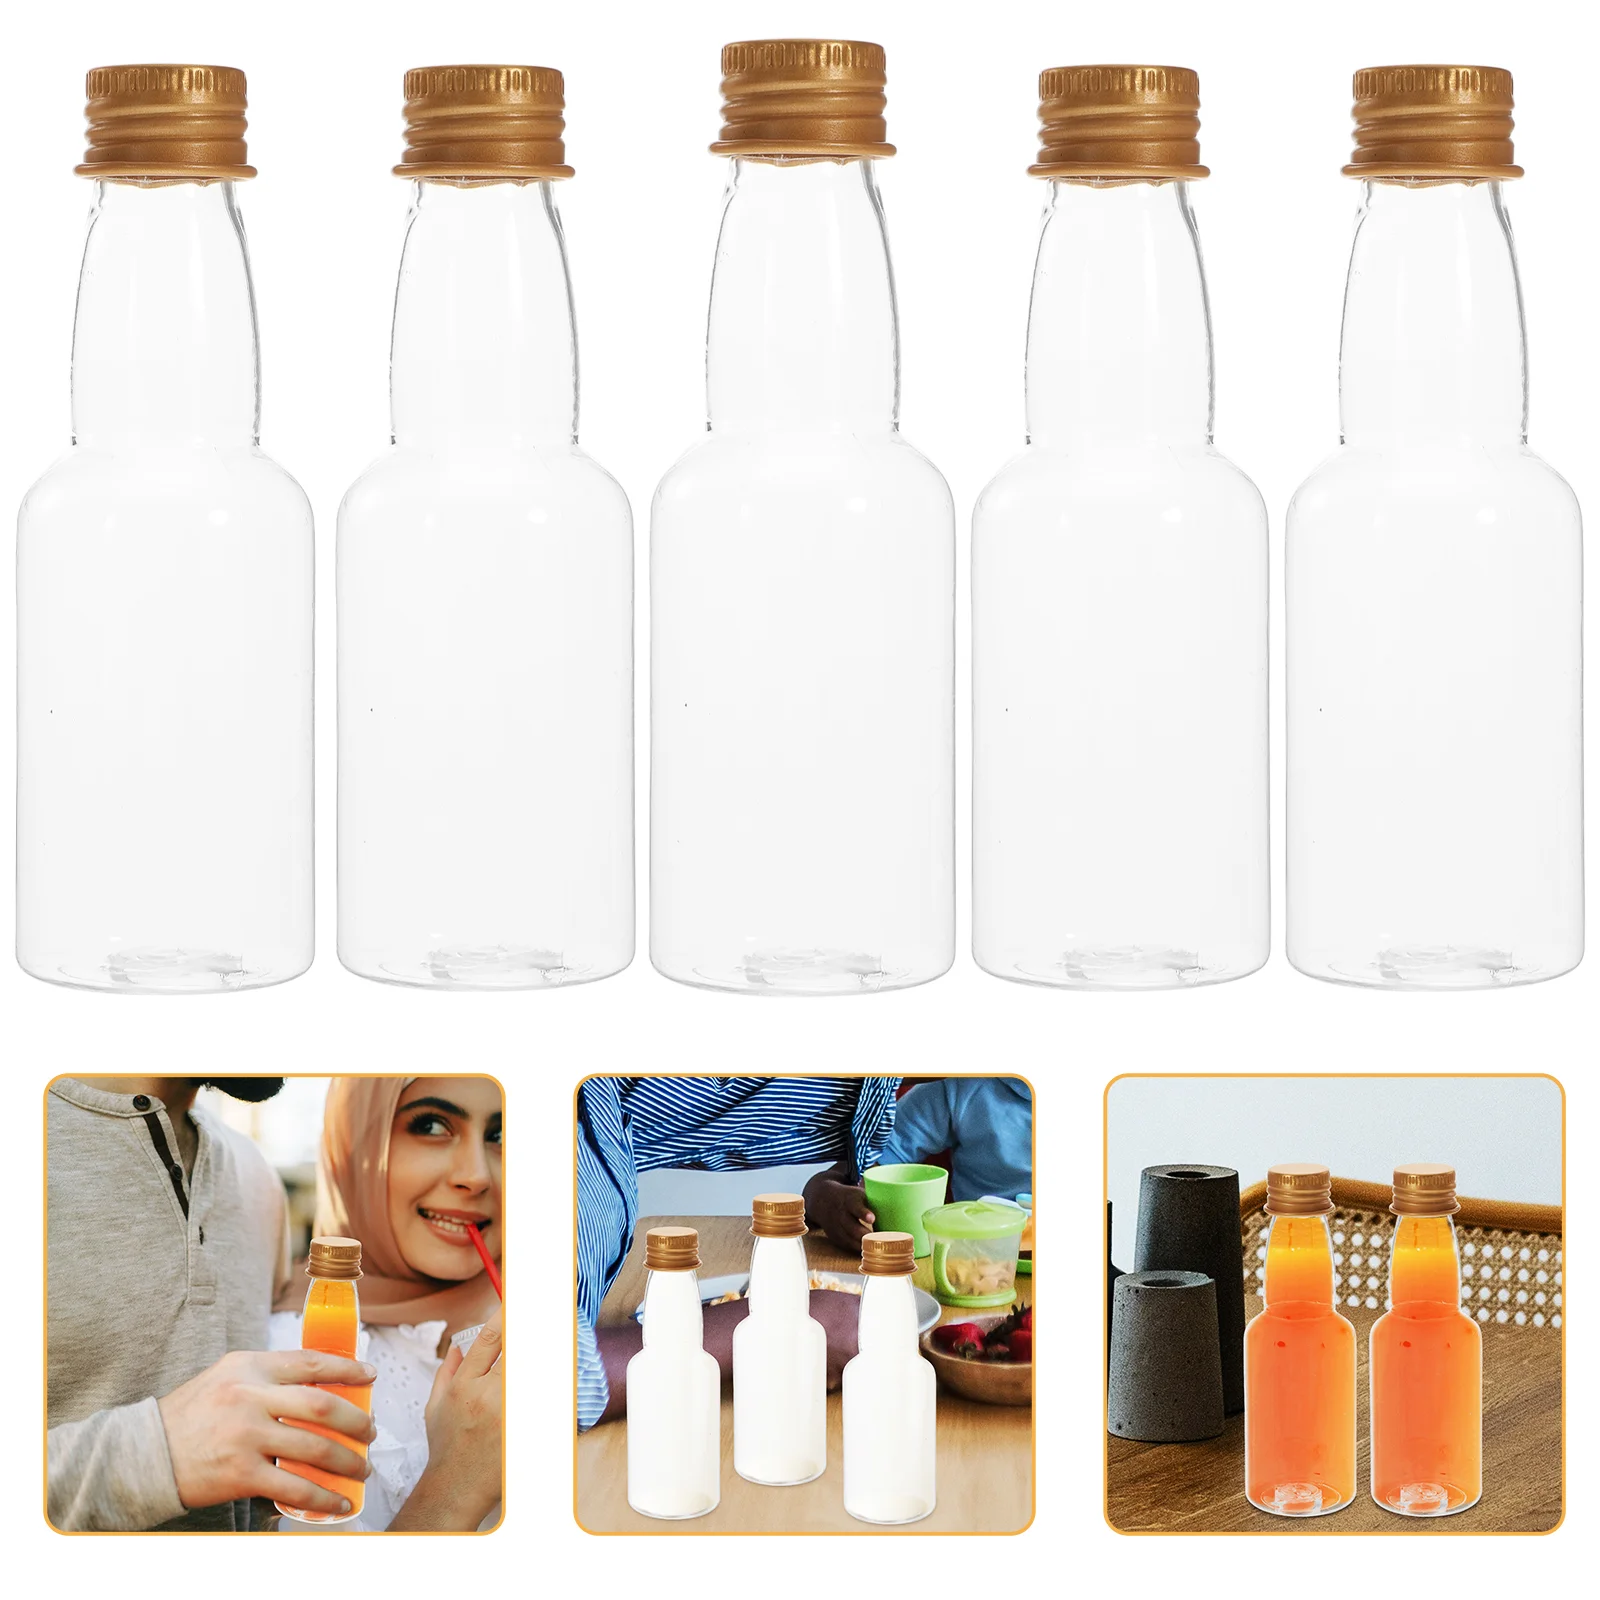 

25 Pcs Transparent Juice Bottle Clear Drinking Bottles Mini Syrup Container for Refrigerator Plastic Travel Containers